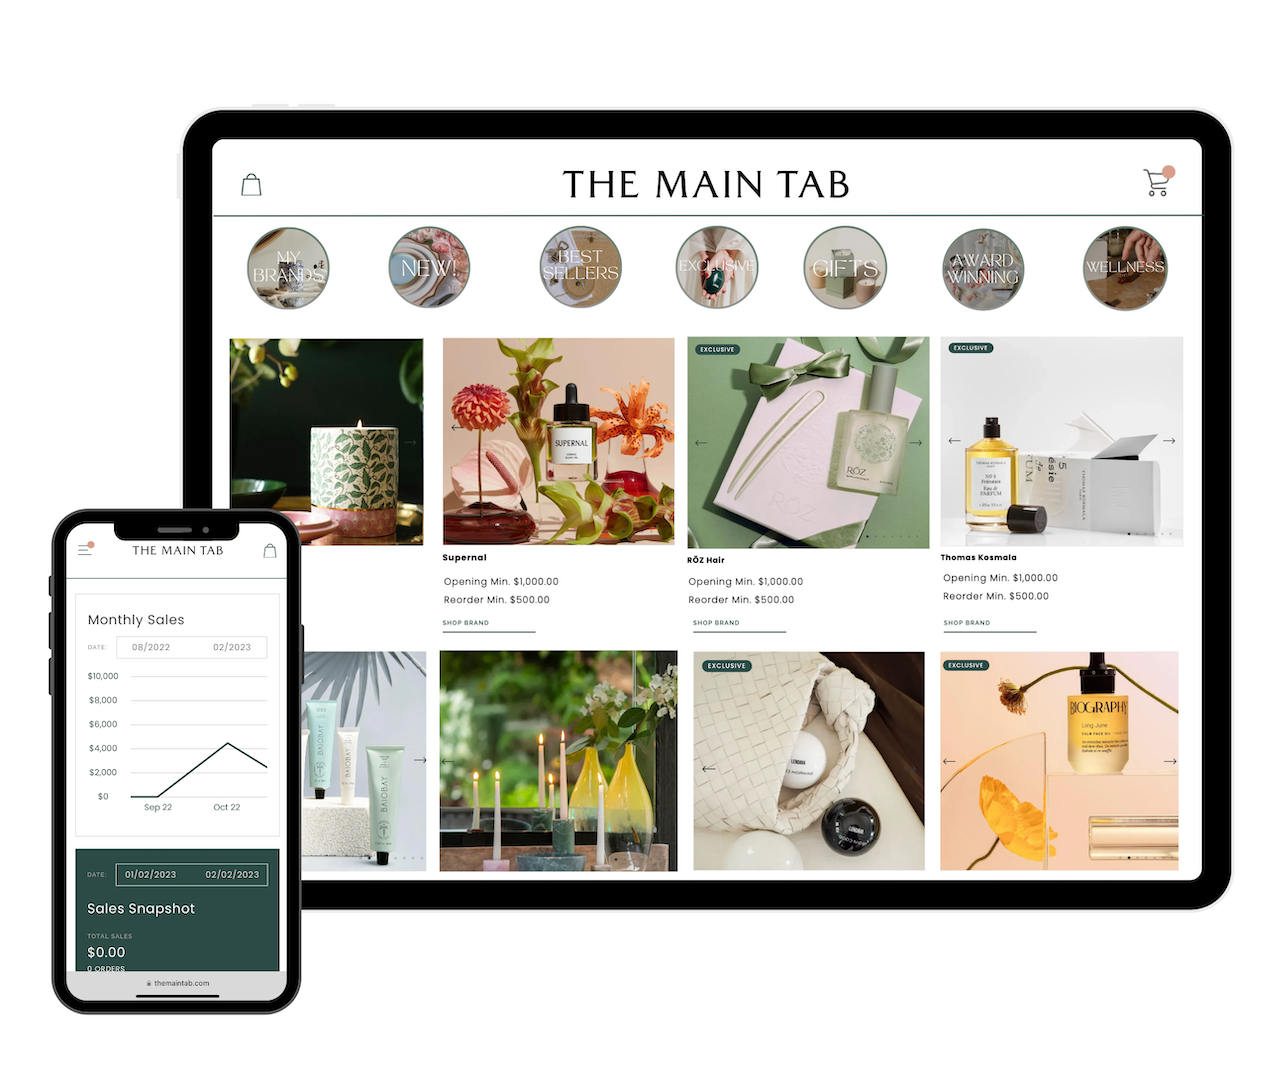 The Main Tab is building a sales representative program to work with luxury brands and boutiques